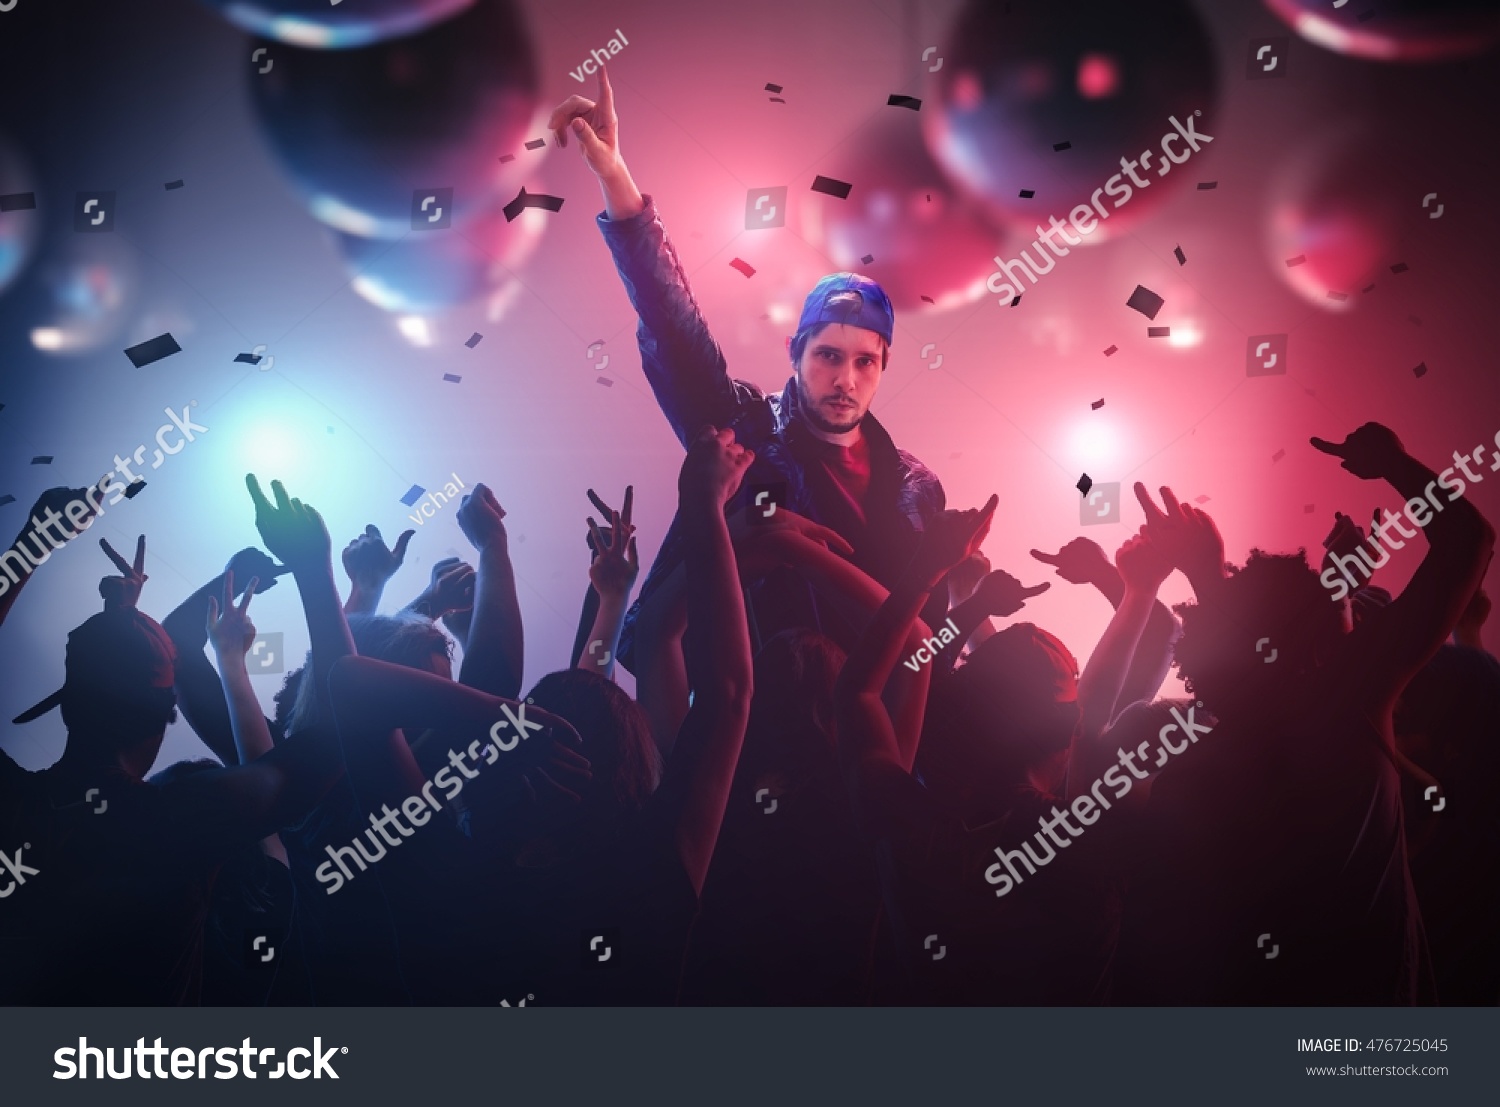 DJ or singer has hand up at disco party in club with crowd of people. #476725045